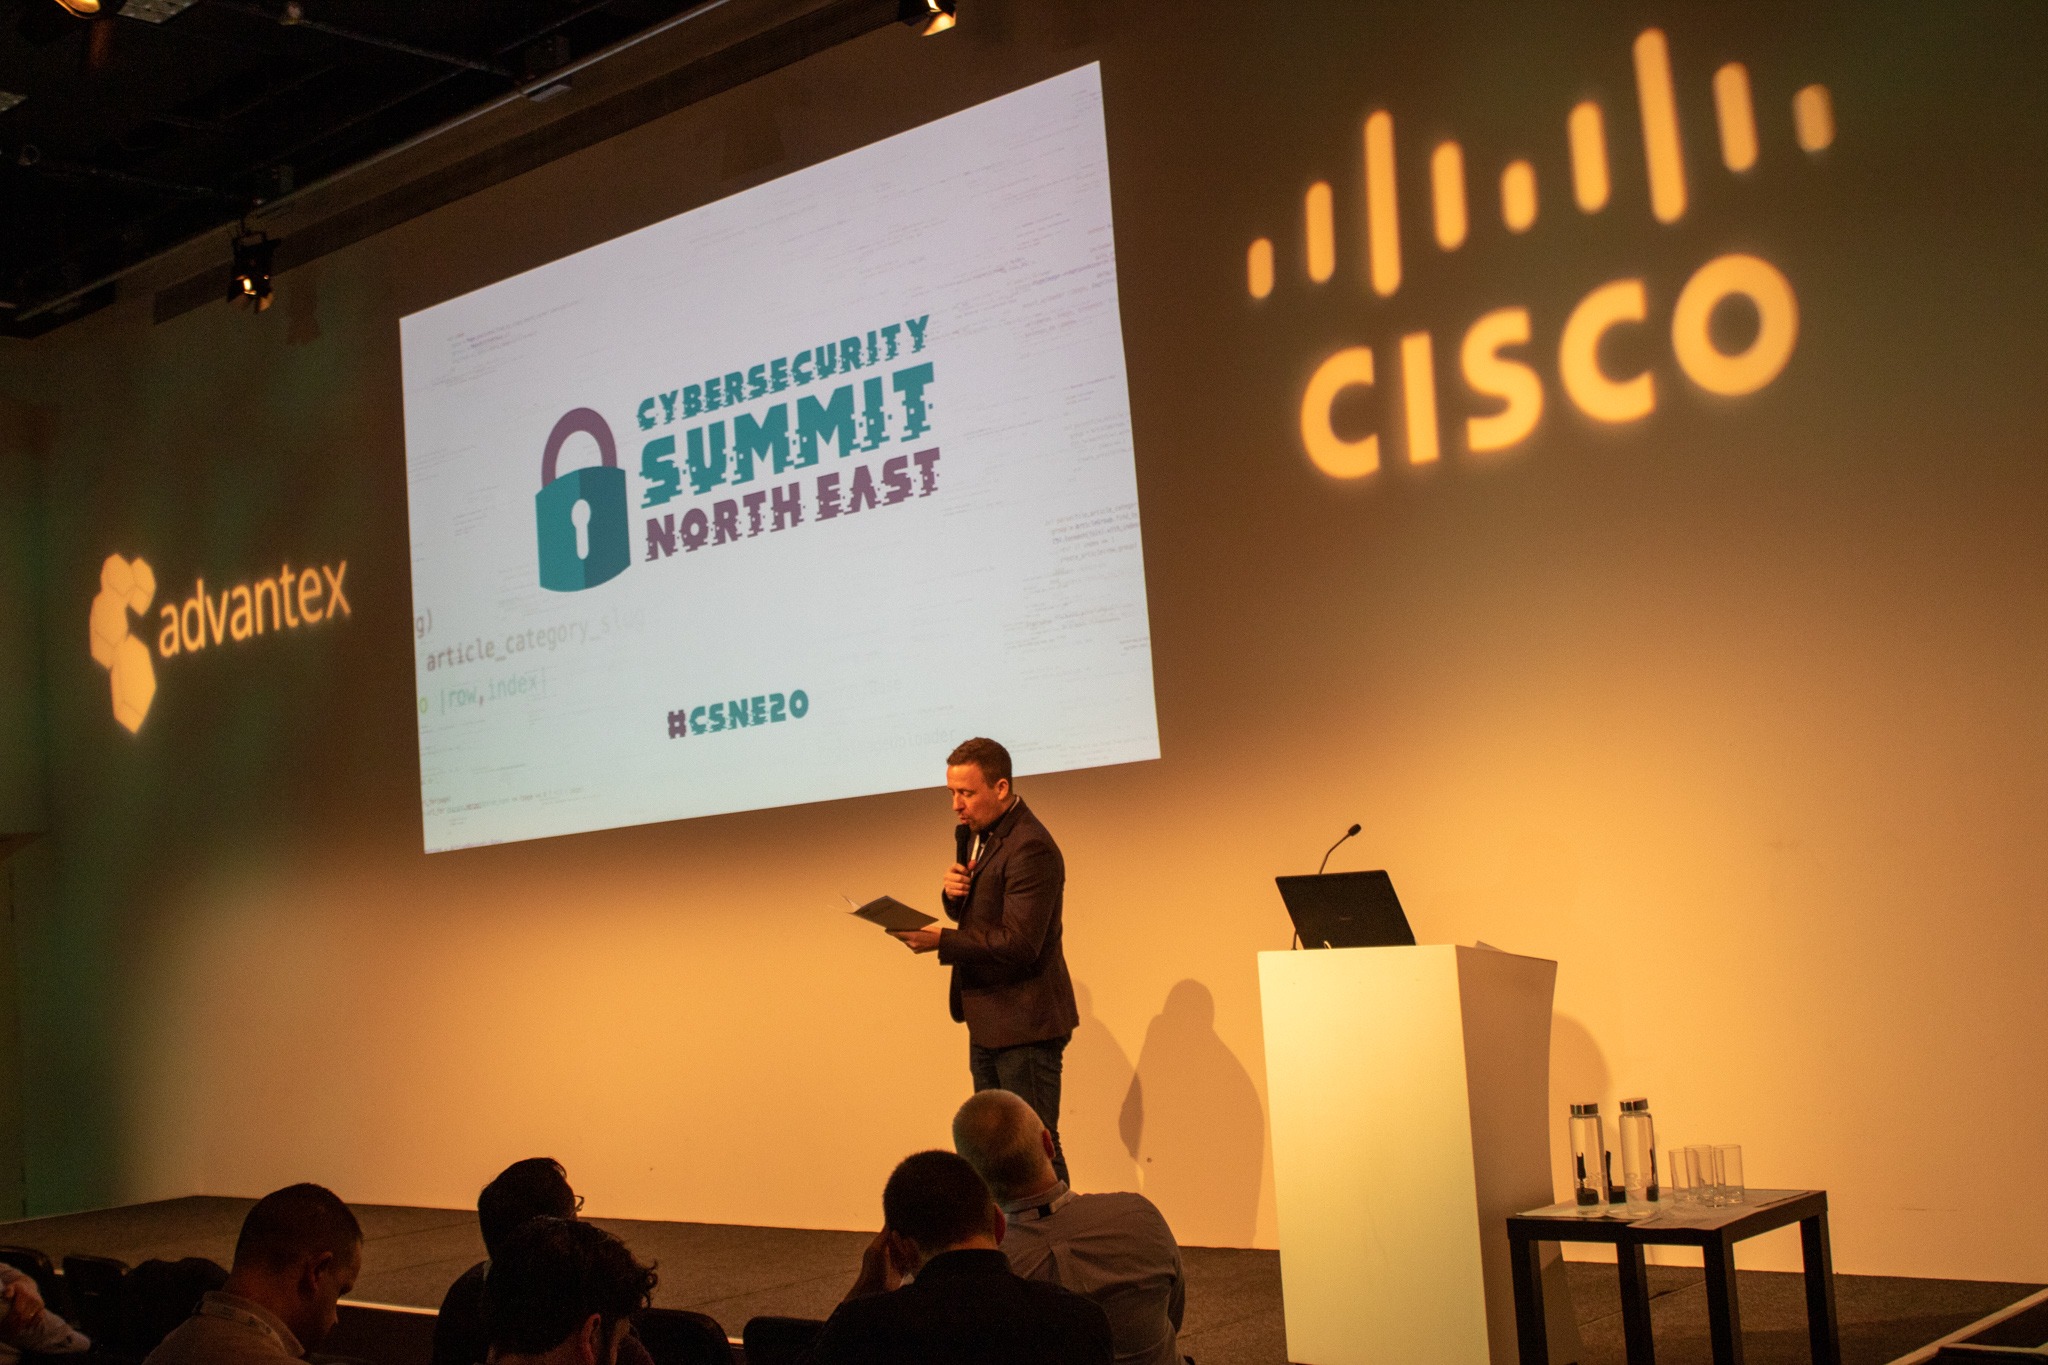 Compere, Justin Lockwood at Cybersecurity Summit: North East